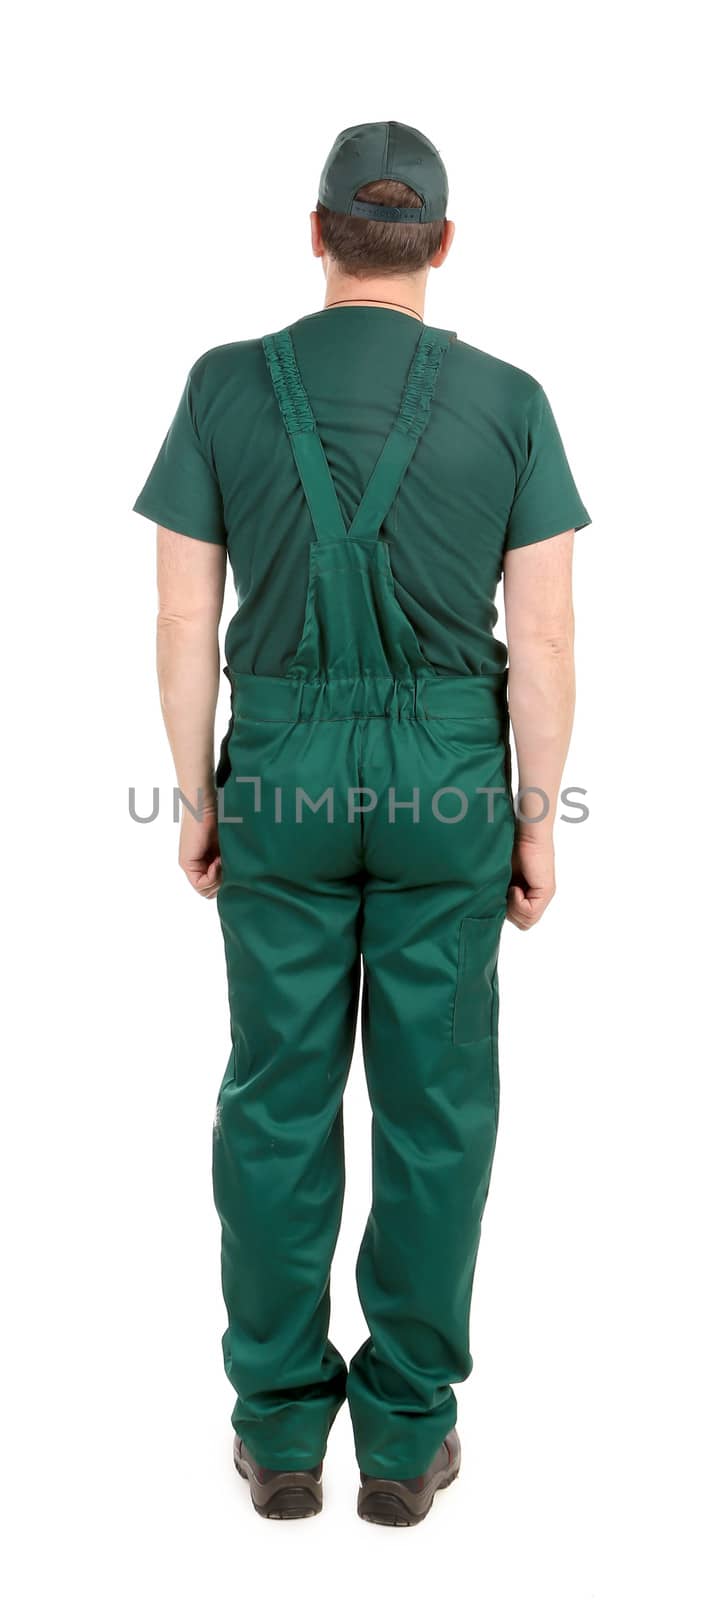 Worker in green overalls. Back by indigolotos